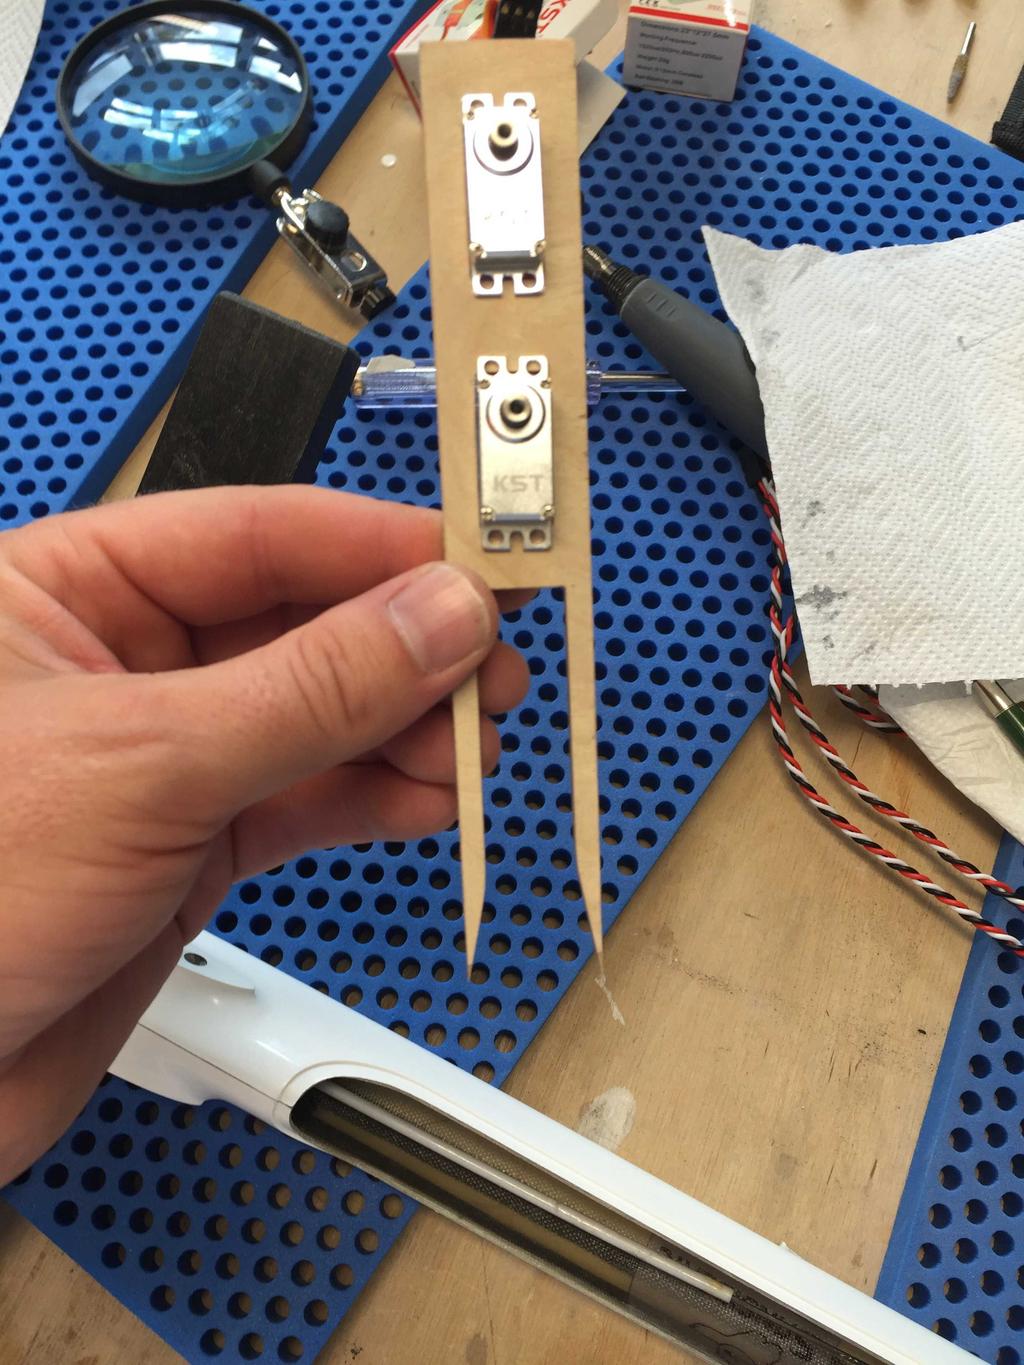 If this step is done you are ready for finishing your plane make your connections to the servos.